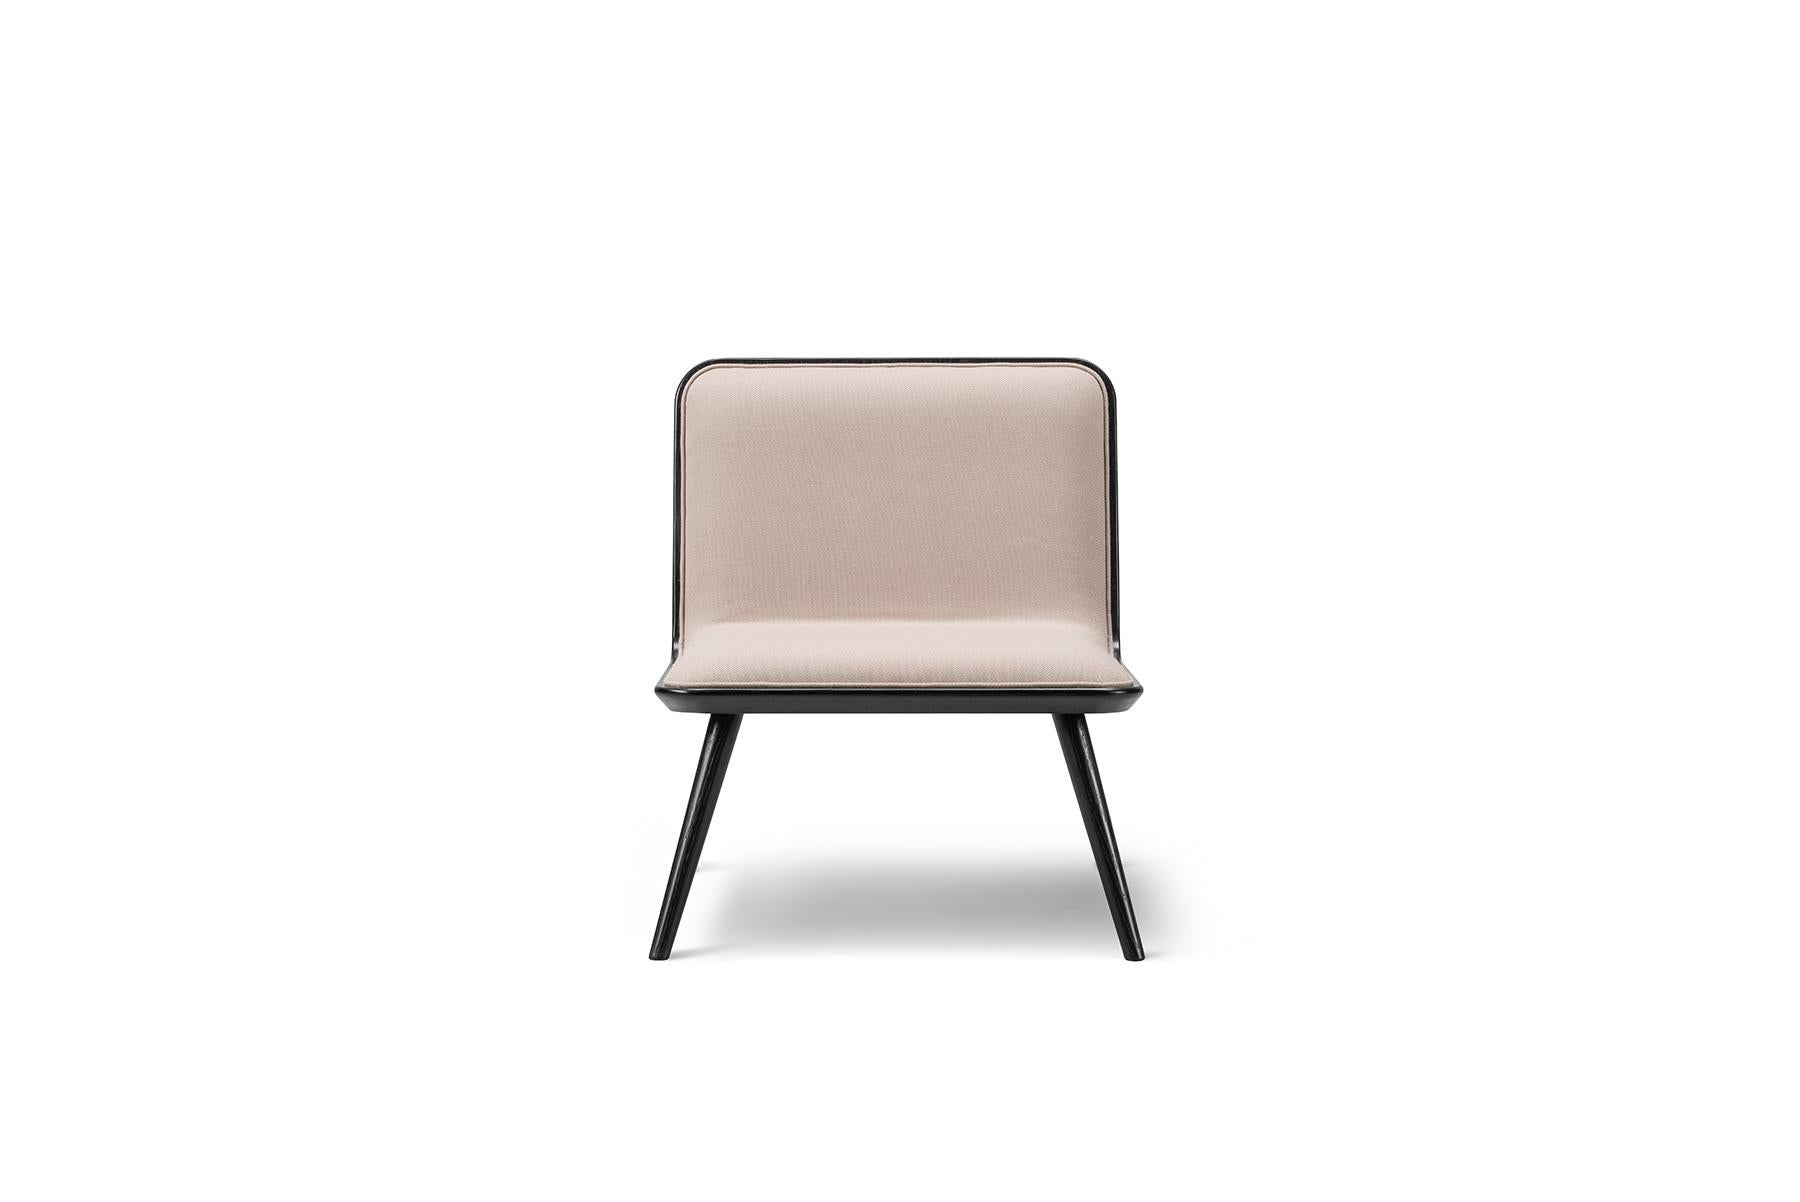 Space Copenhagen spine chair – wood base is a light lounge chair for residential homes or open lounge areas. The accented detailing on the front upholstered seat in leather or textile combined with a back in oak makes the chair as beautiful standing